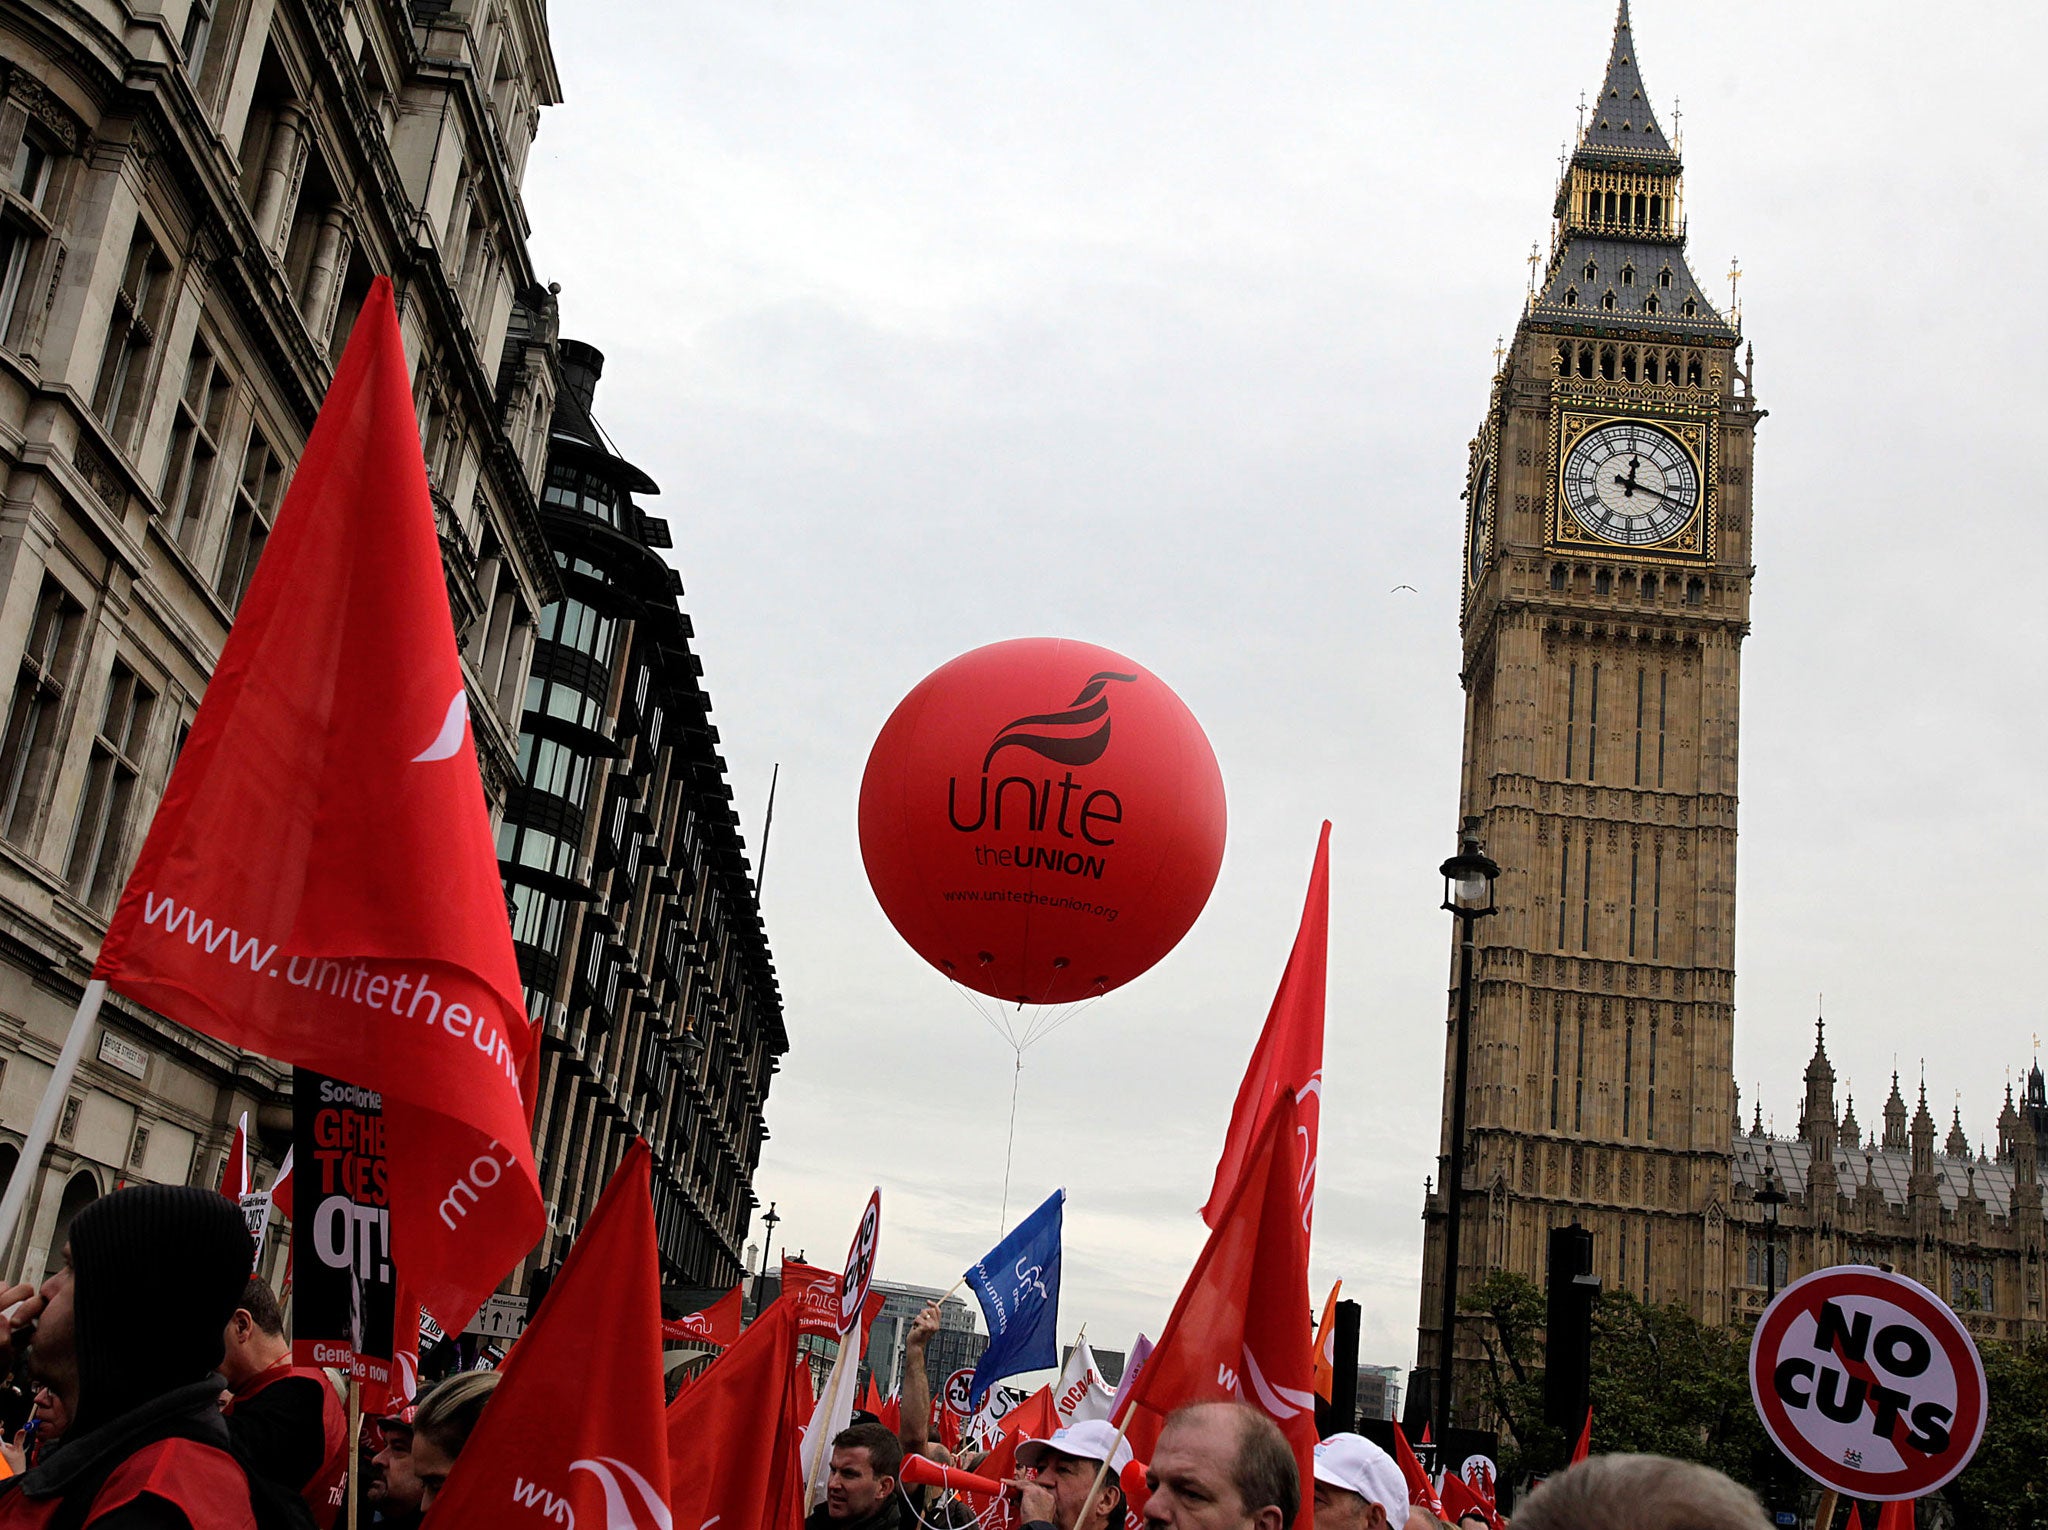 Demonstrators take part in a TUC march in protest against the government's austerity measures on October 20, 2012 in London, England. Thousands of people are taking part in the Trades Union Congress (TUC) organised anti-cuts march that ends with a rally in Hyde Park, where Labour leader Ed Miliband is scheduled to address the demonstrators